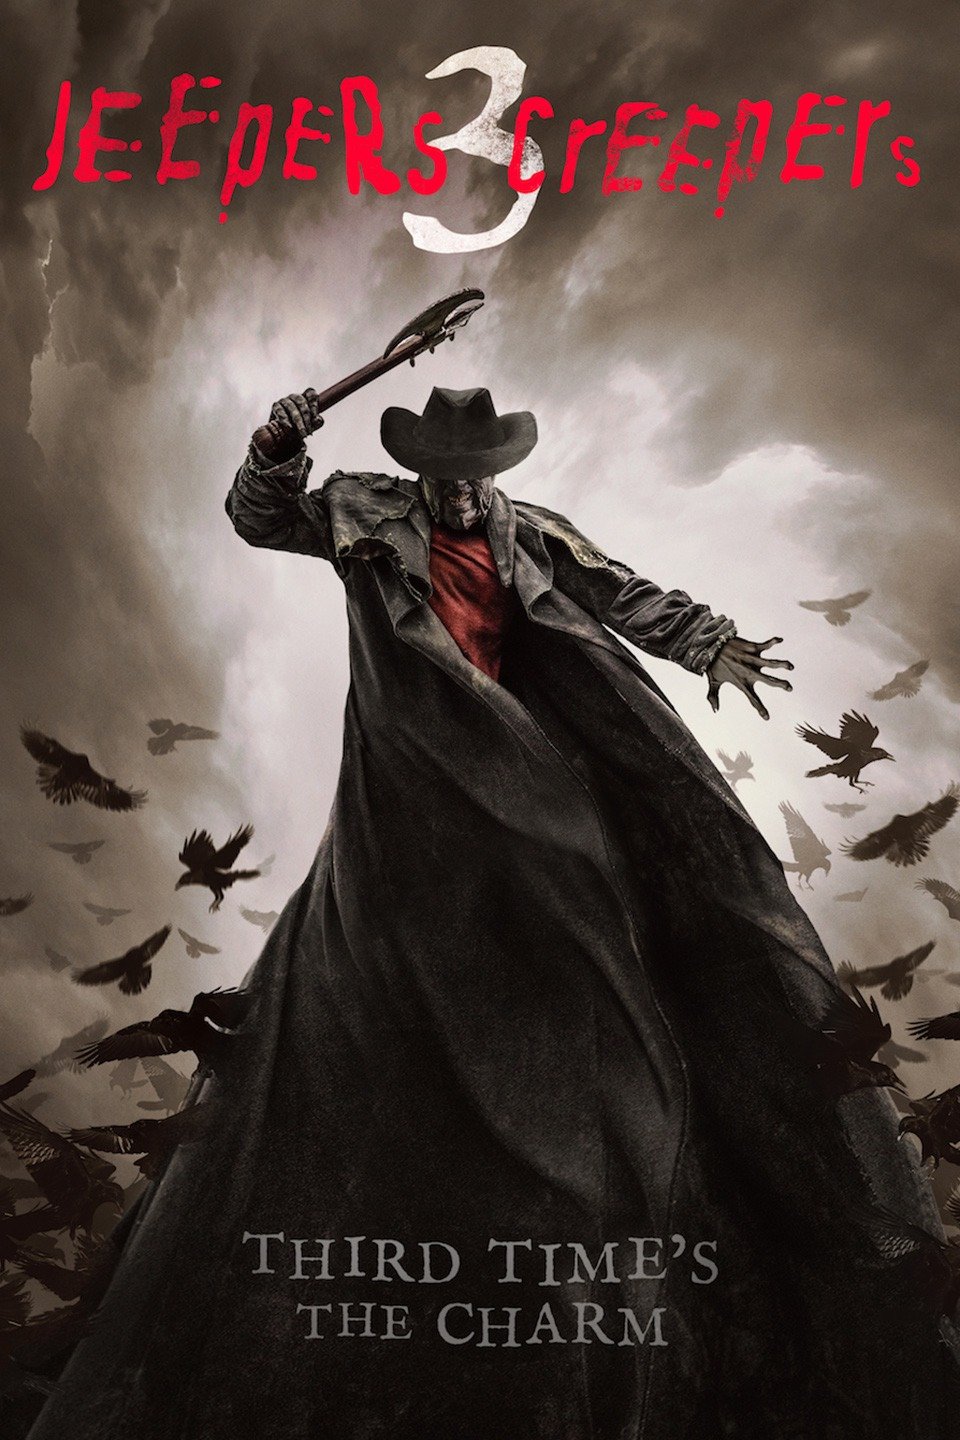 best scenes from first jeepers creepers movie